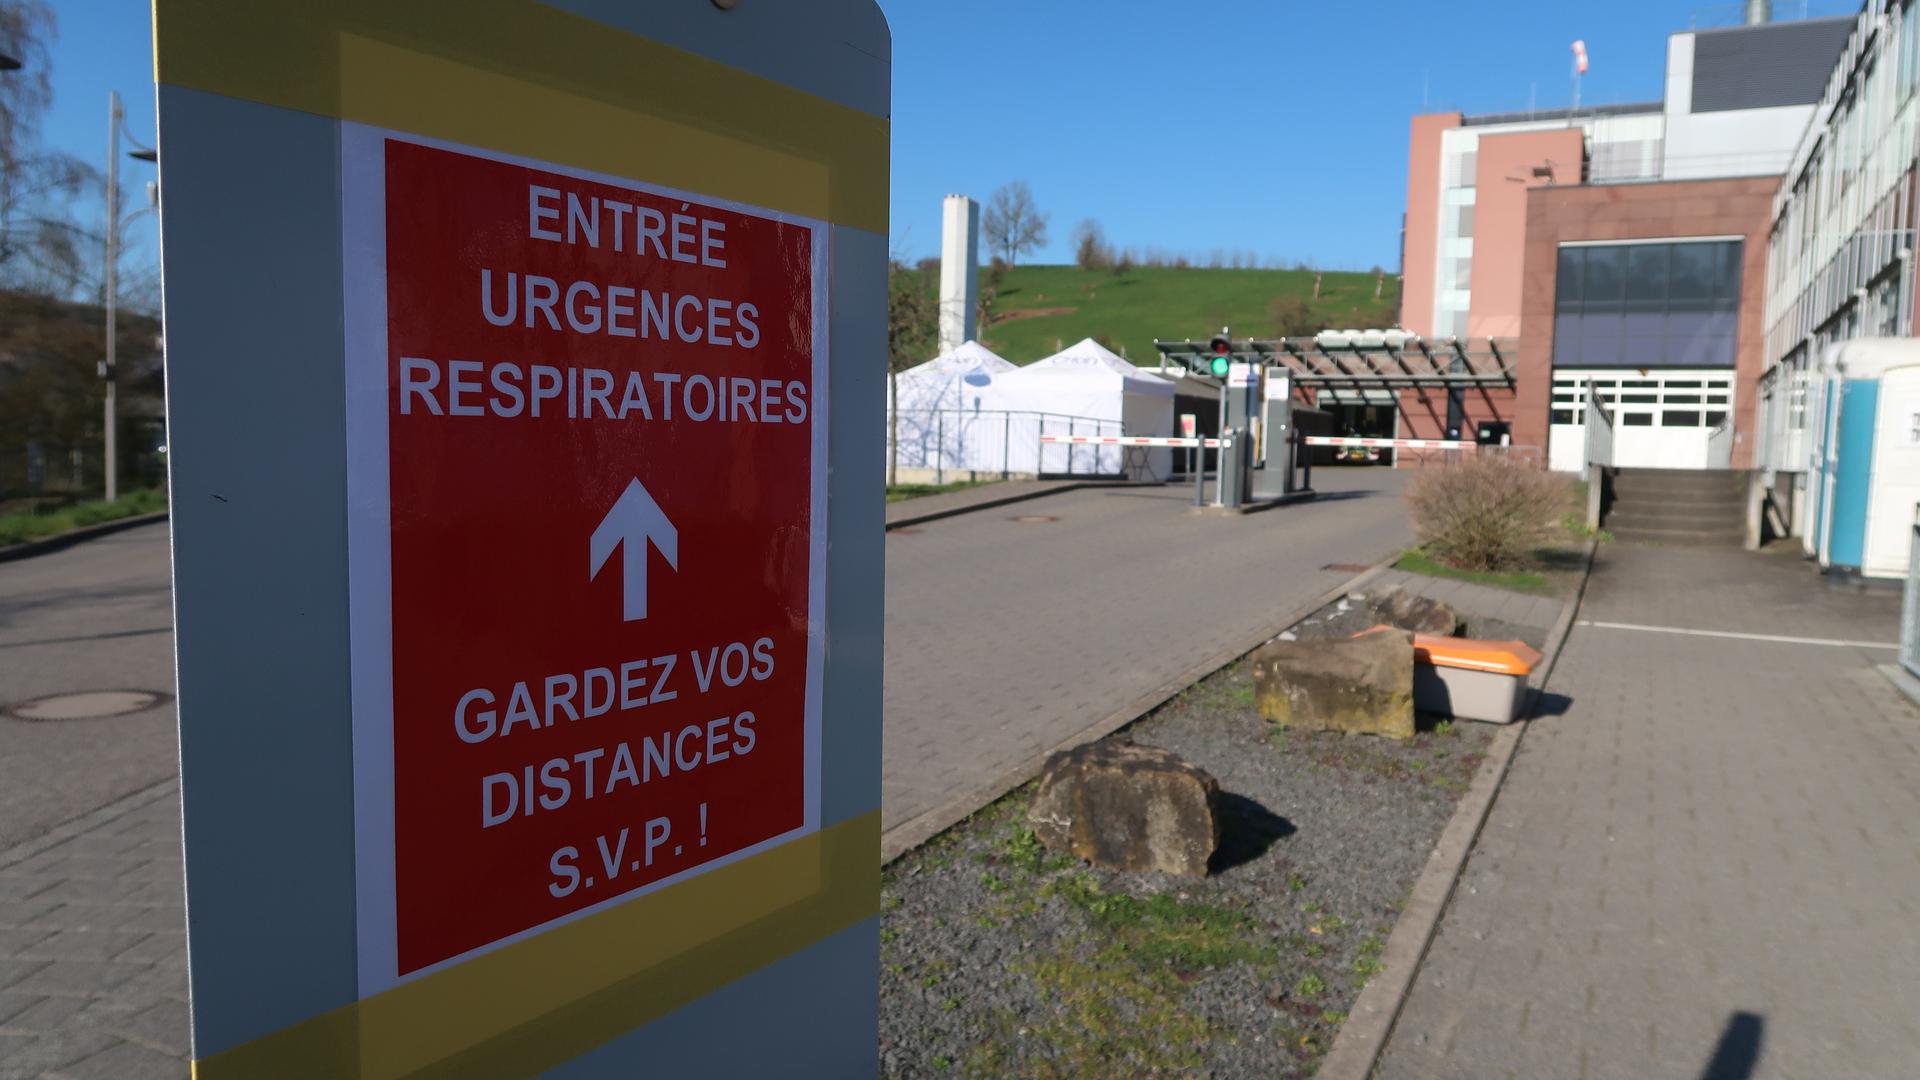 Irregularities with vaccinations have now happened in two hospitals, including at the Centre hospitalier du Nord in Ettelbrück (here pictured)